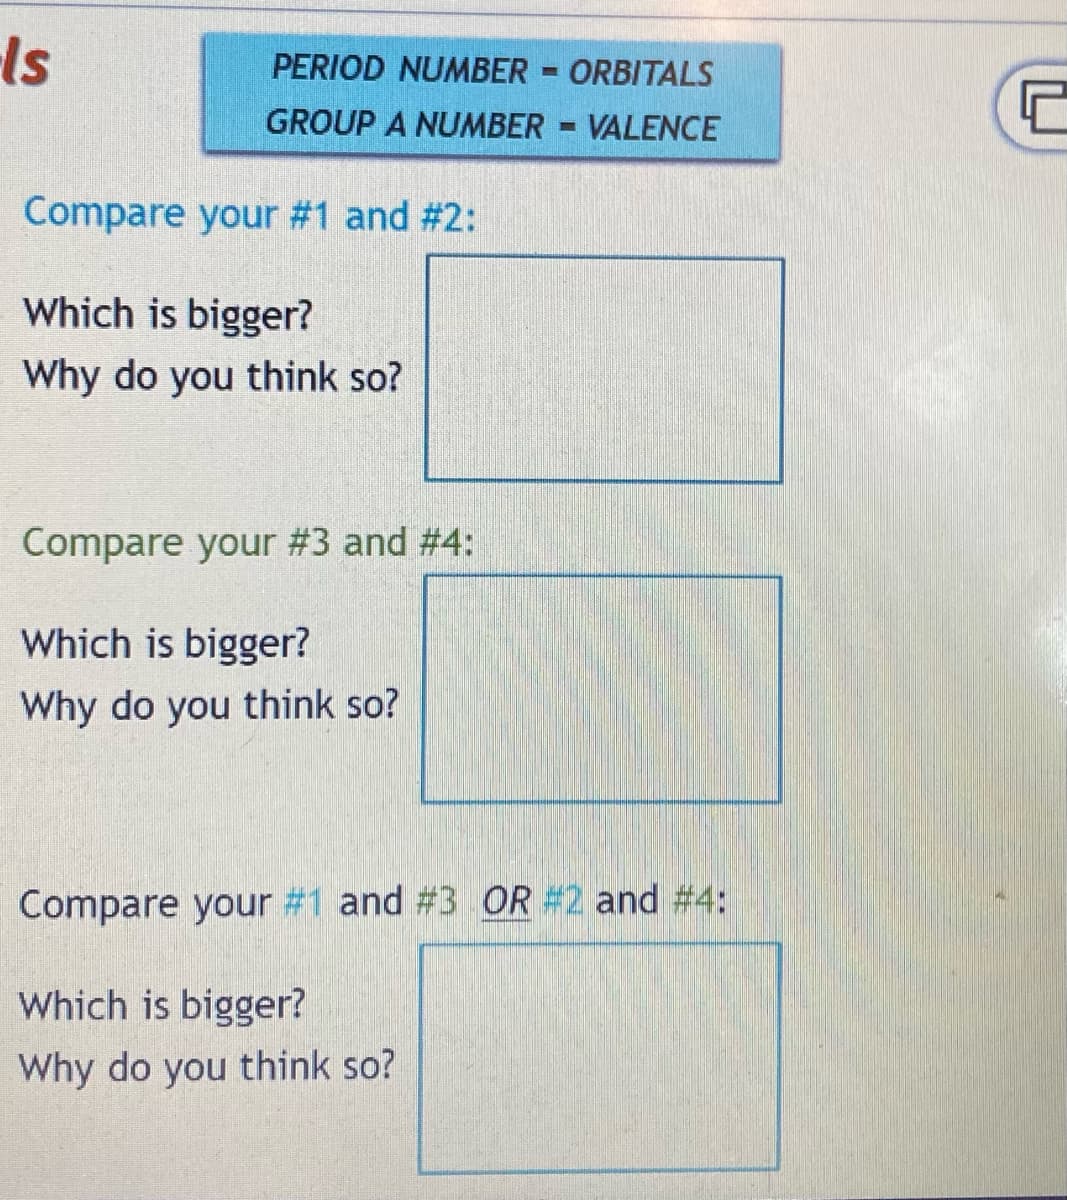 Is
PERIOD NUMBER ORBITALS
GROUP A NUMBER VALENCE
Compare your #1 and #2:
Which is bigger?
Why do you think so?
Compare your #3 and #4:
Which is bigger?
Why do you think so?
Compare your #1 and #3 OR #2 and #4:
Which is bigger?
Why do you think so?